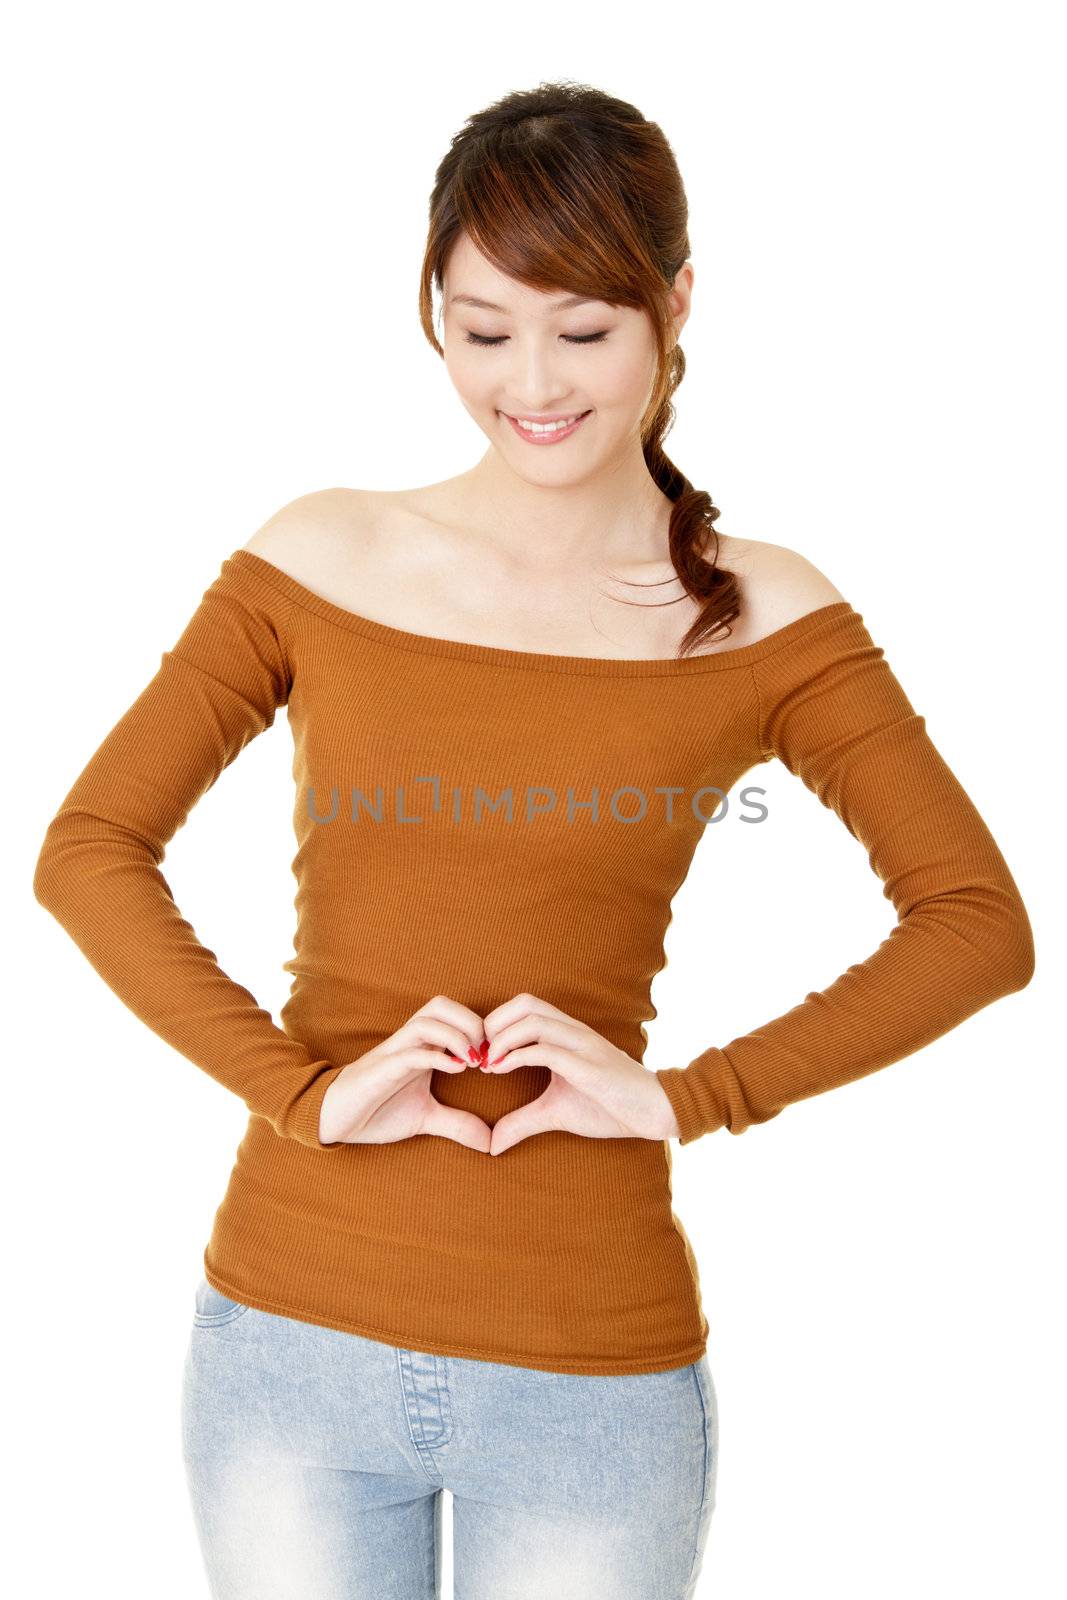 Smiling woman make heart shape on her belly.